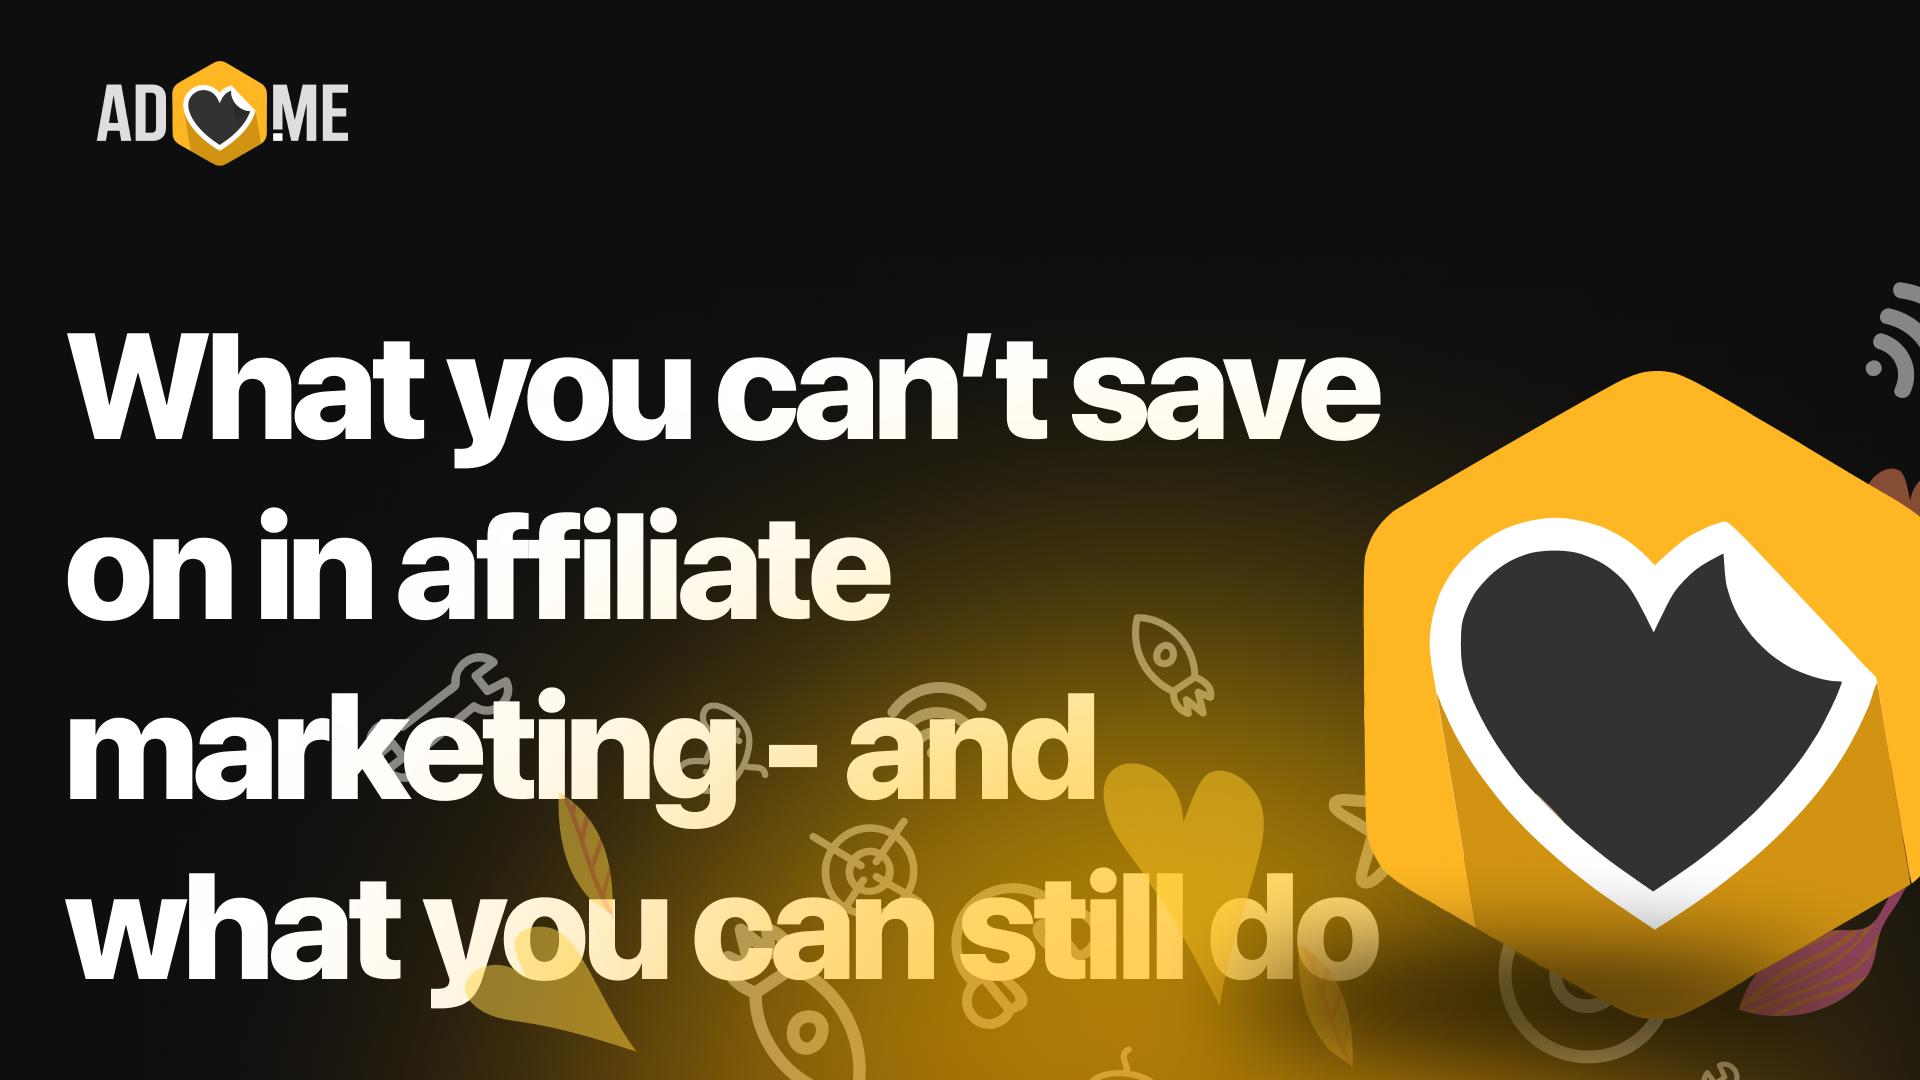 What you can’t save on in affiliate marketing - and what you can still do